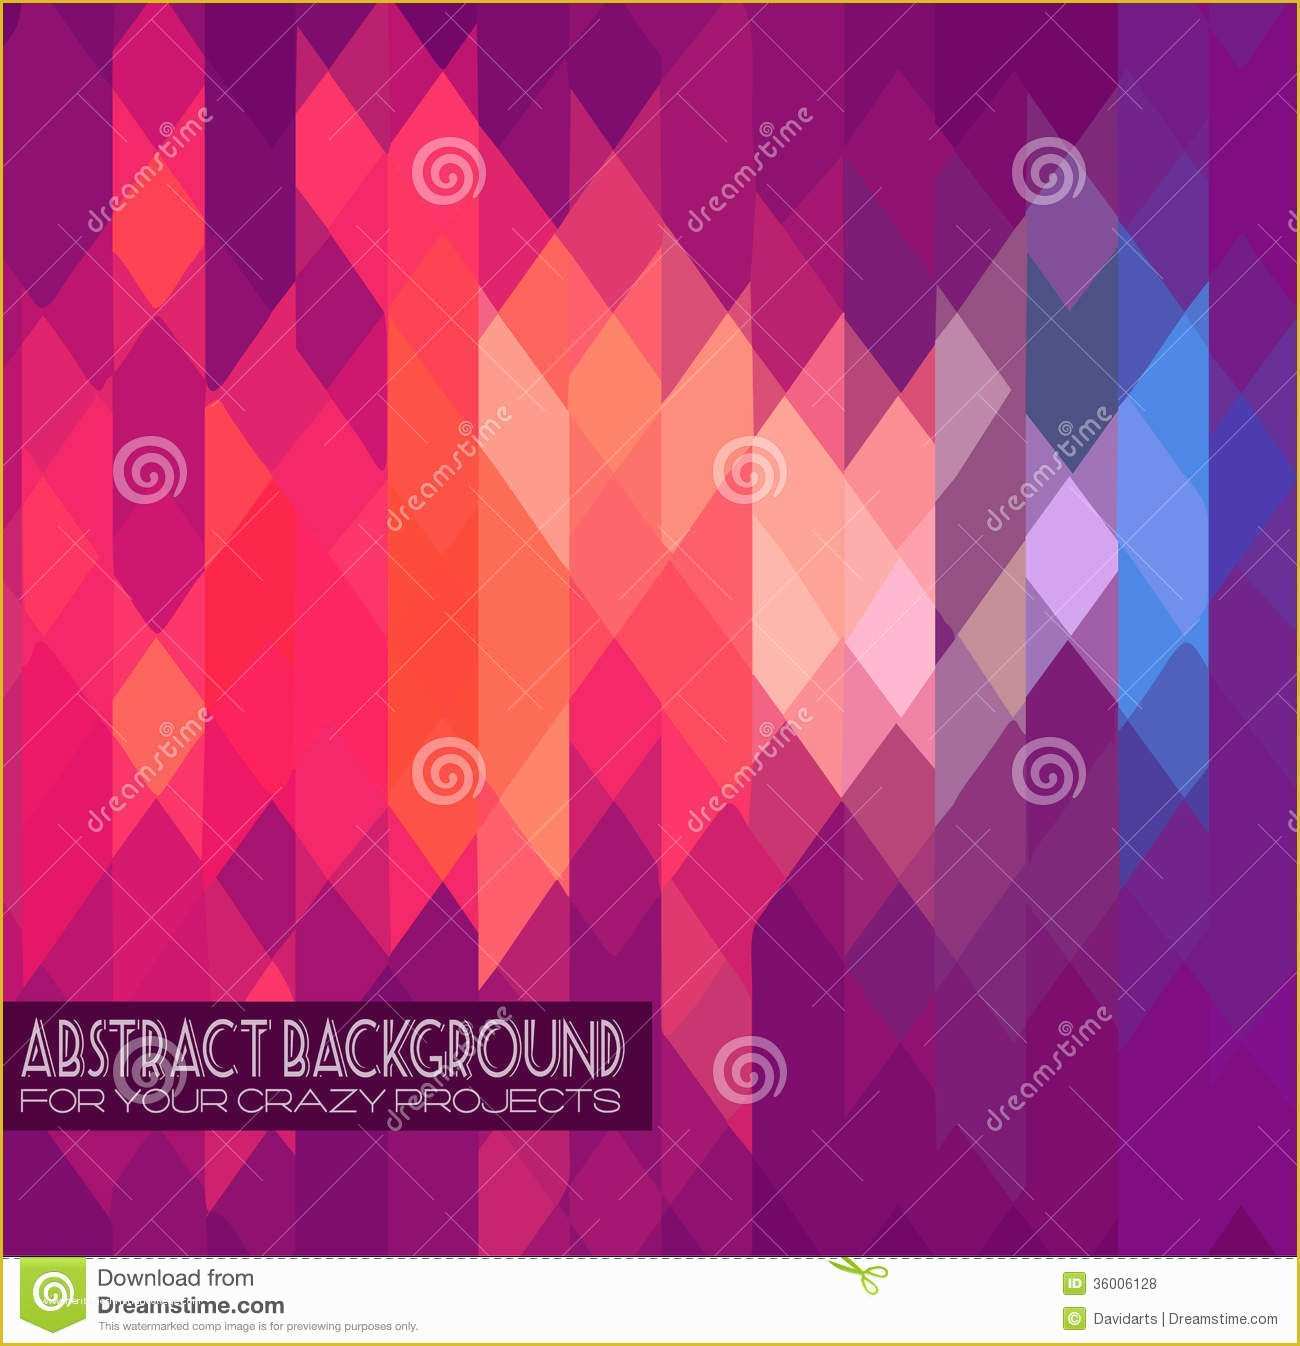 Royalty Free Flyer Templates Of Abstract Club Flyer Template Background Royalty with